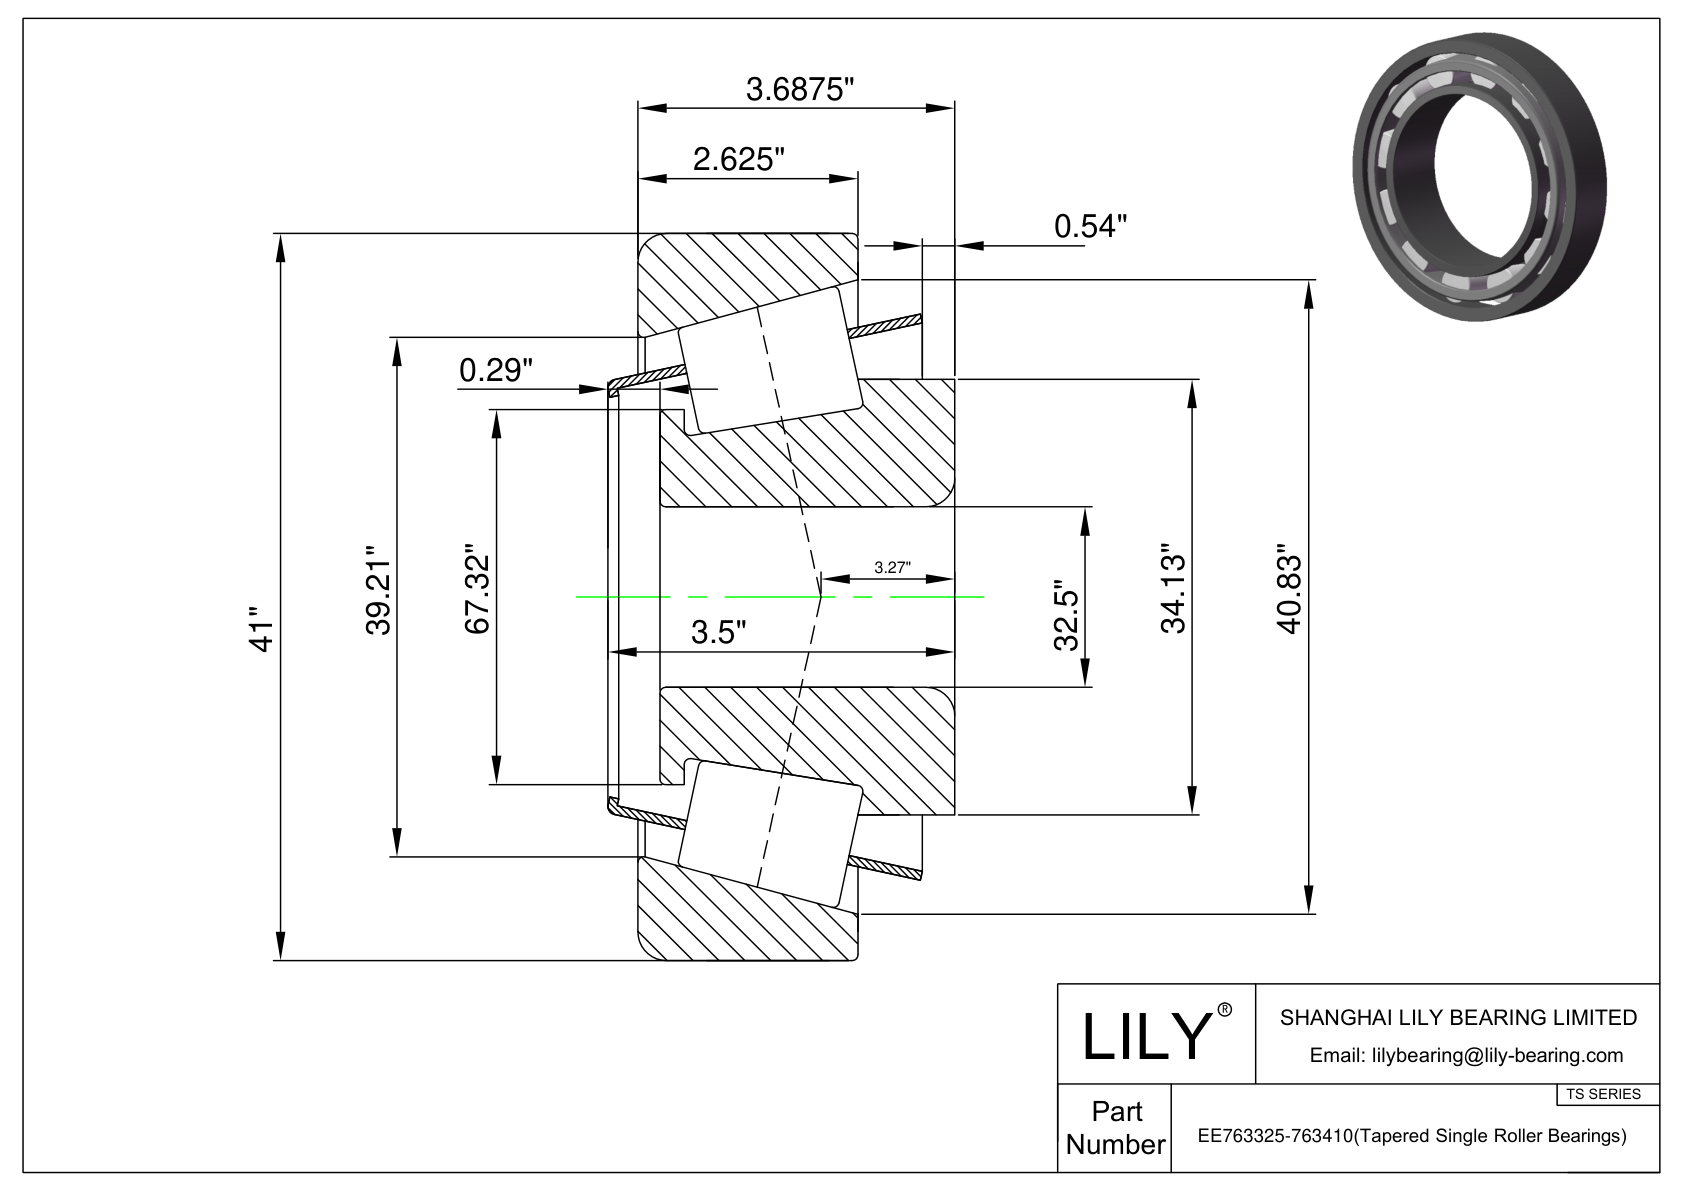 EE763325-763410 TS (Tapered Single Roller Bearings) (Imperial) cad drawing